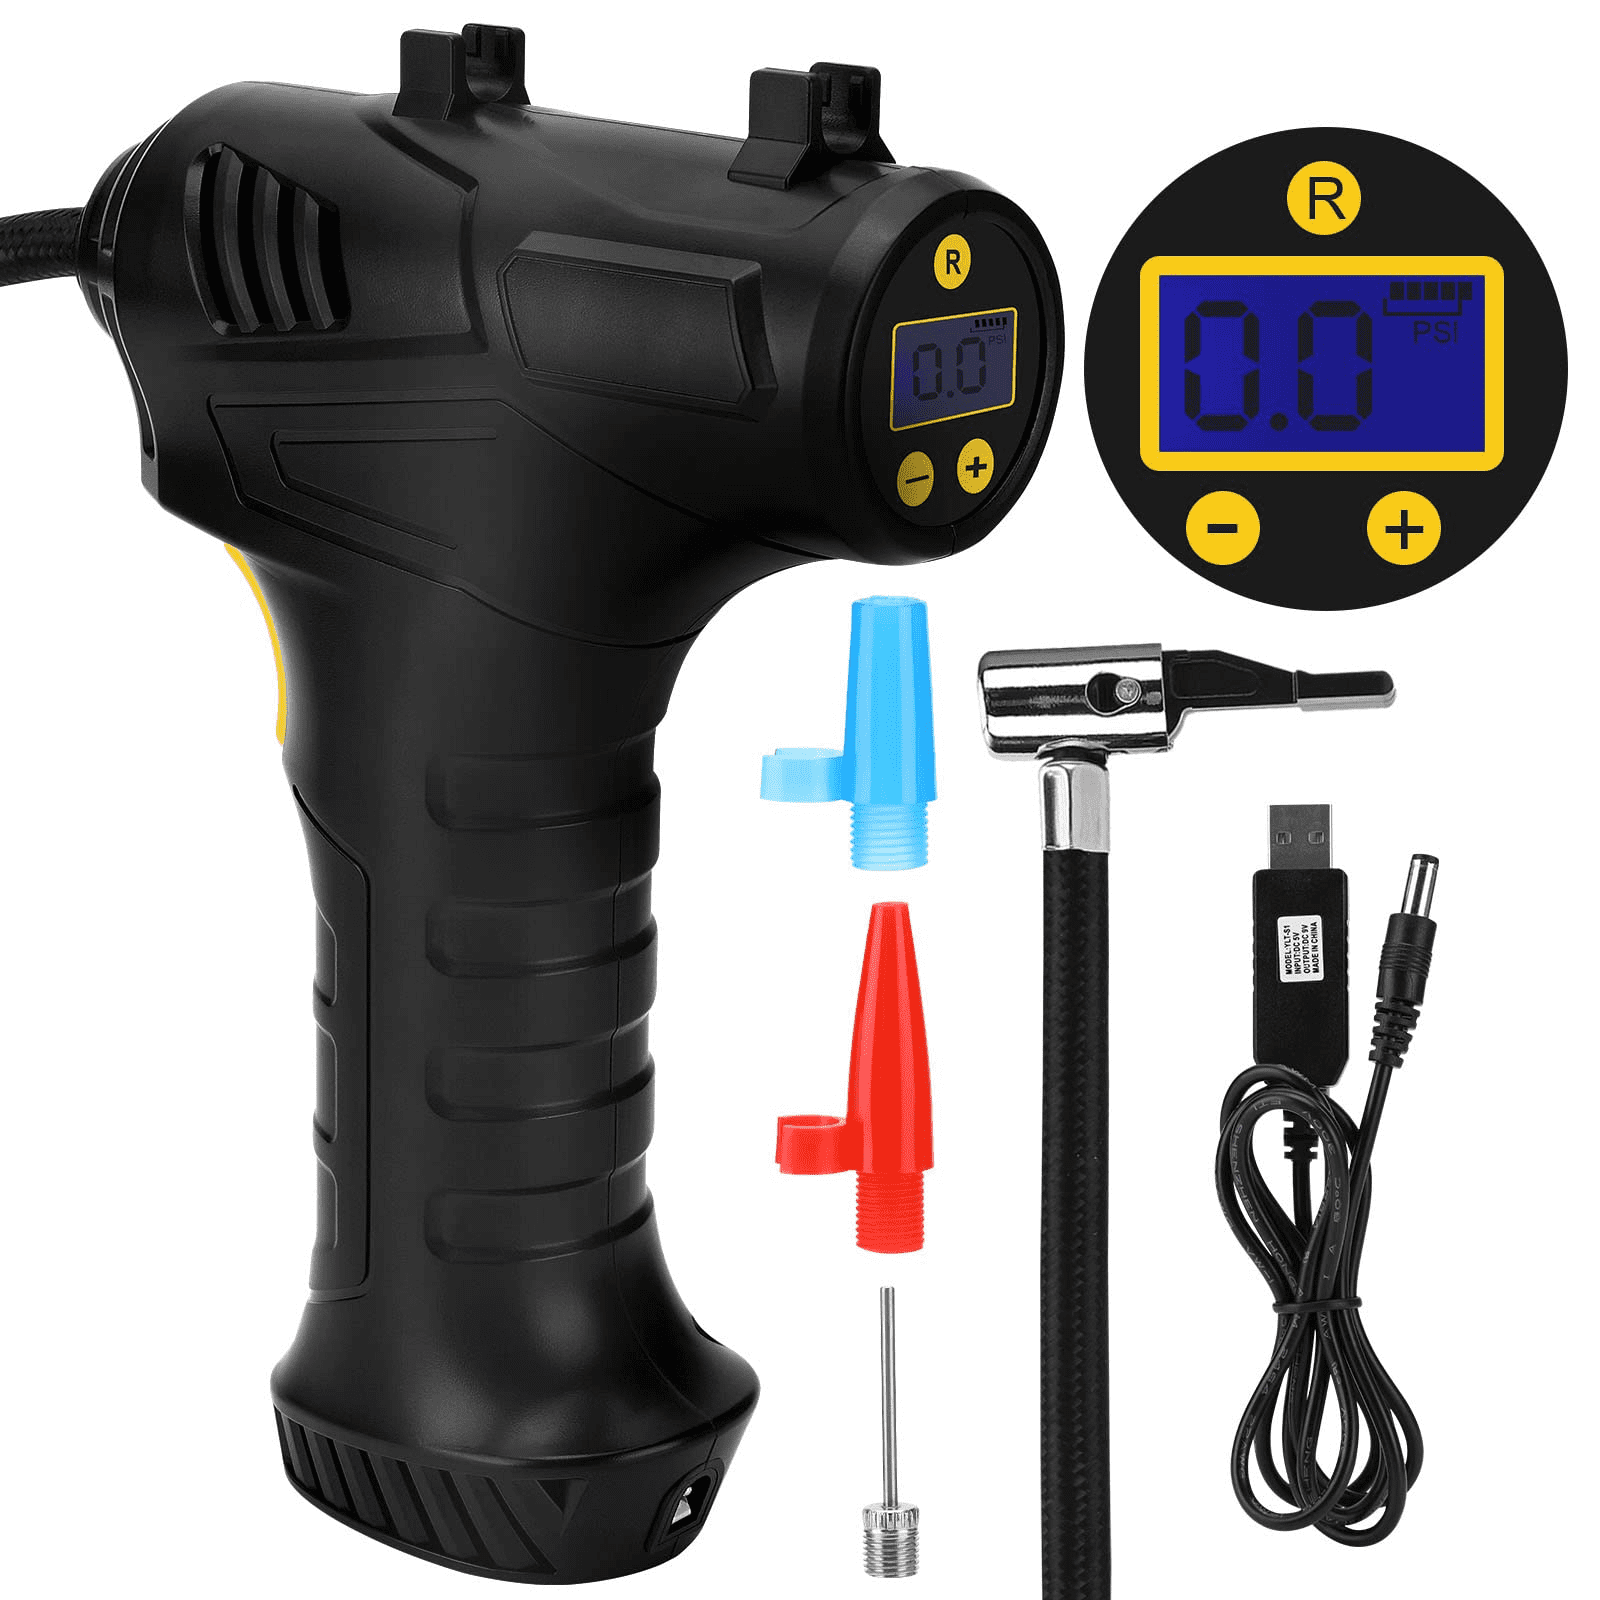 Avid Power Cordless Tire Inflator Kit Bundle with One Extra Battery